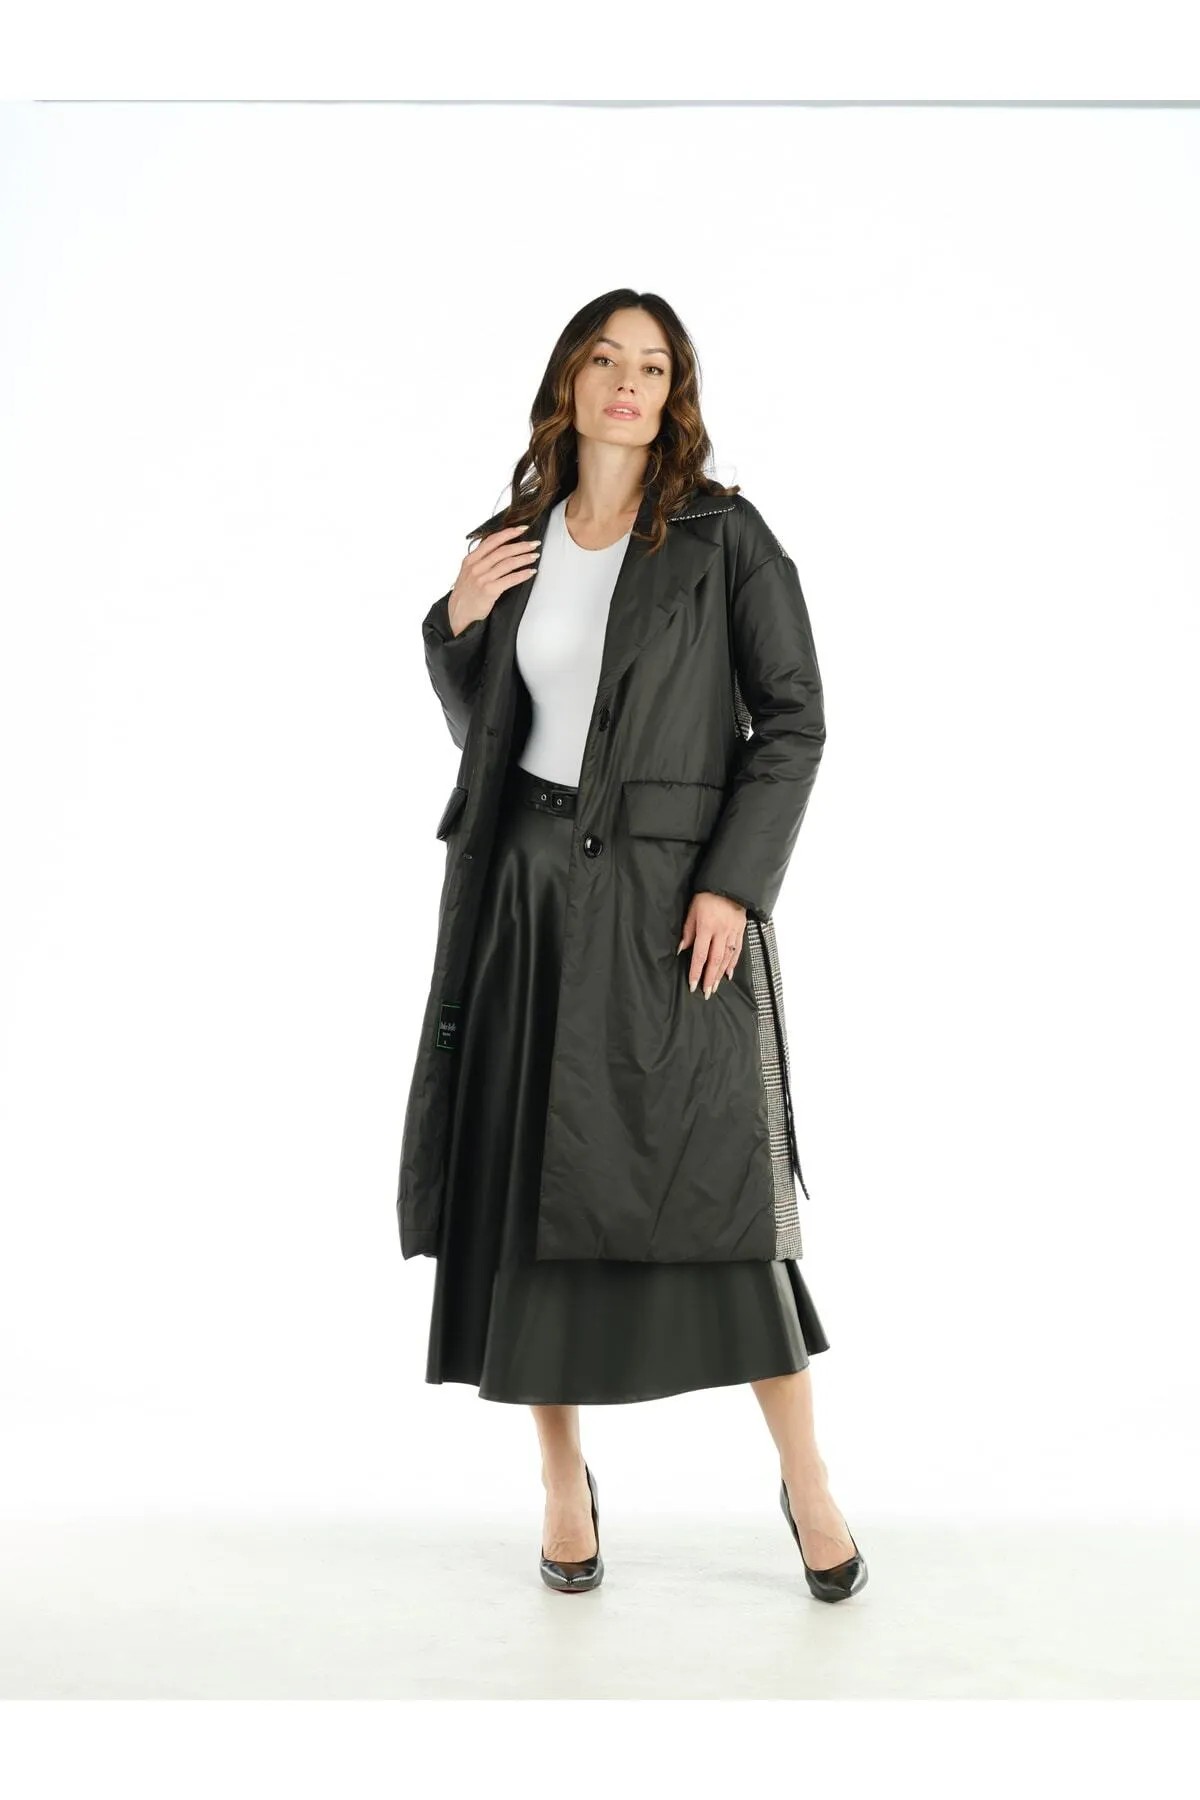 BLACK, FLUFFY ON THE FRONT, Gingham PATTERNED ON THE BACK, LONG COAT